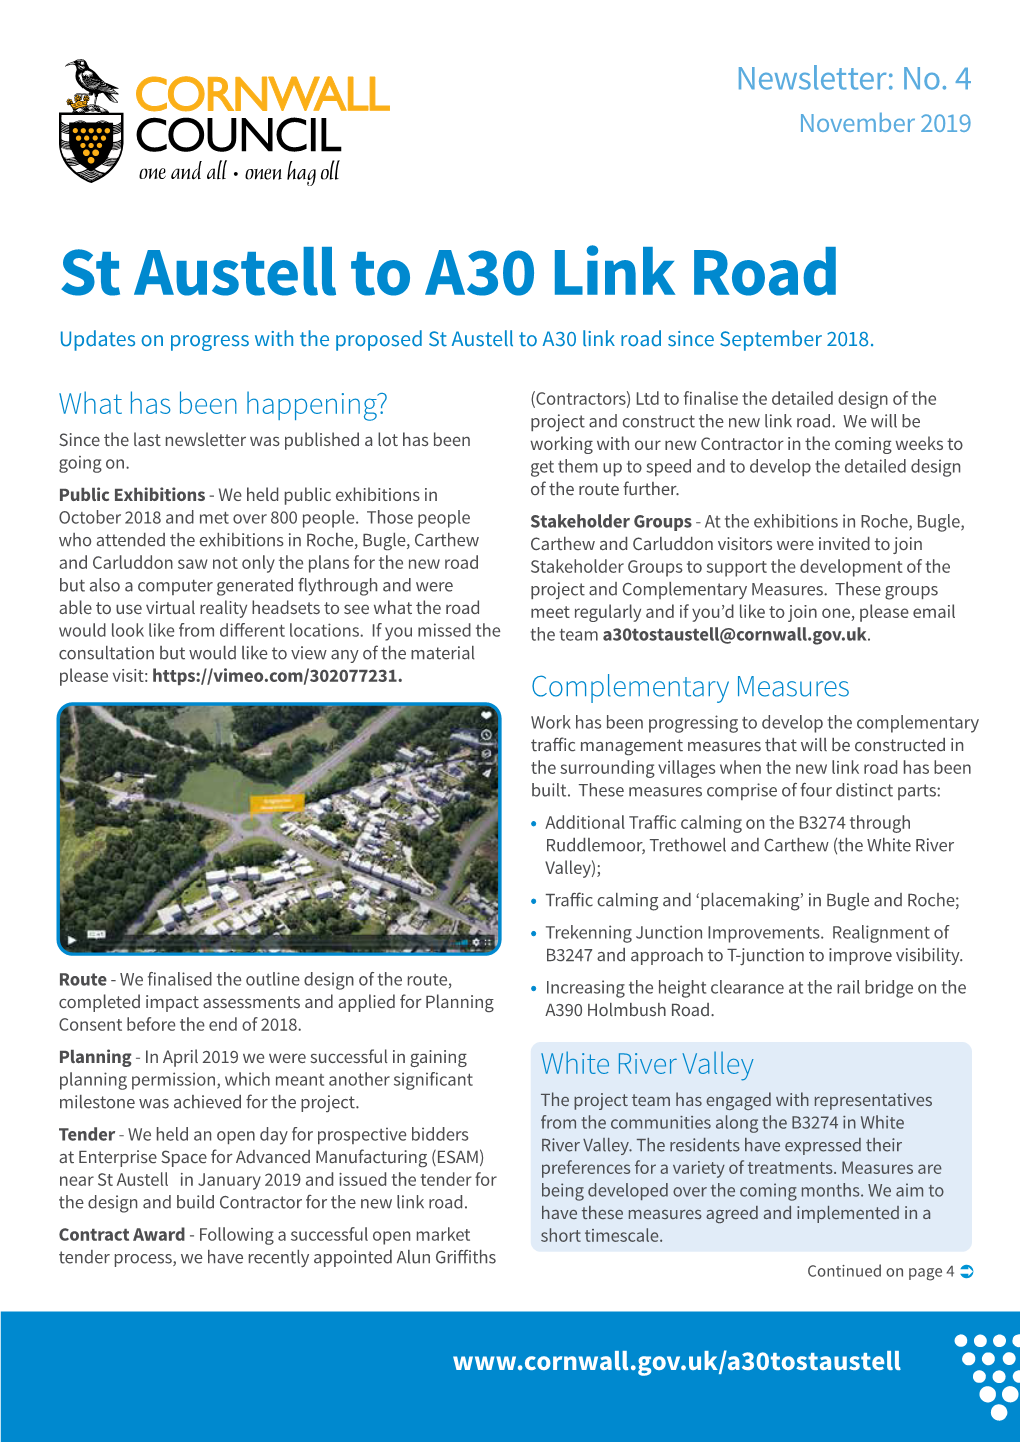 St Austell to A30 Link Road Updates on Progress with the Proposed St Austell to A30 Link Road Since September 2018